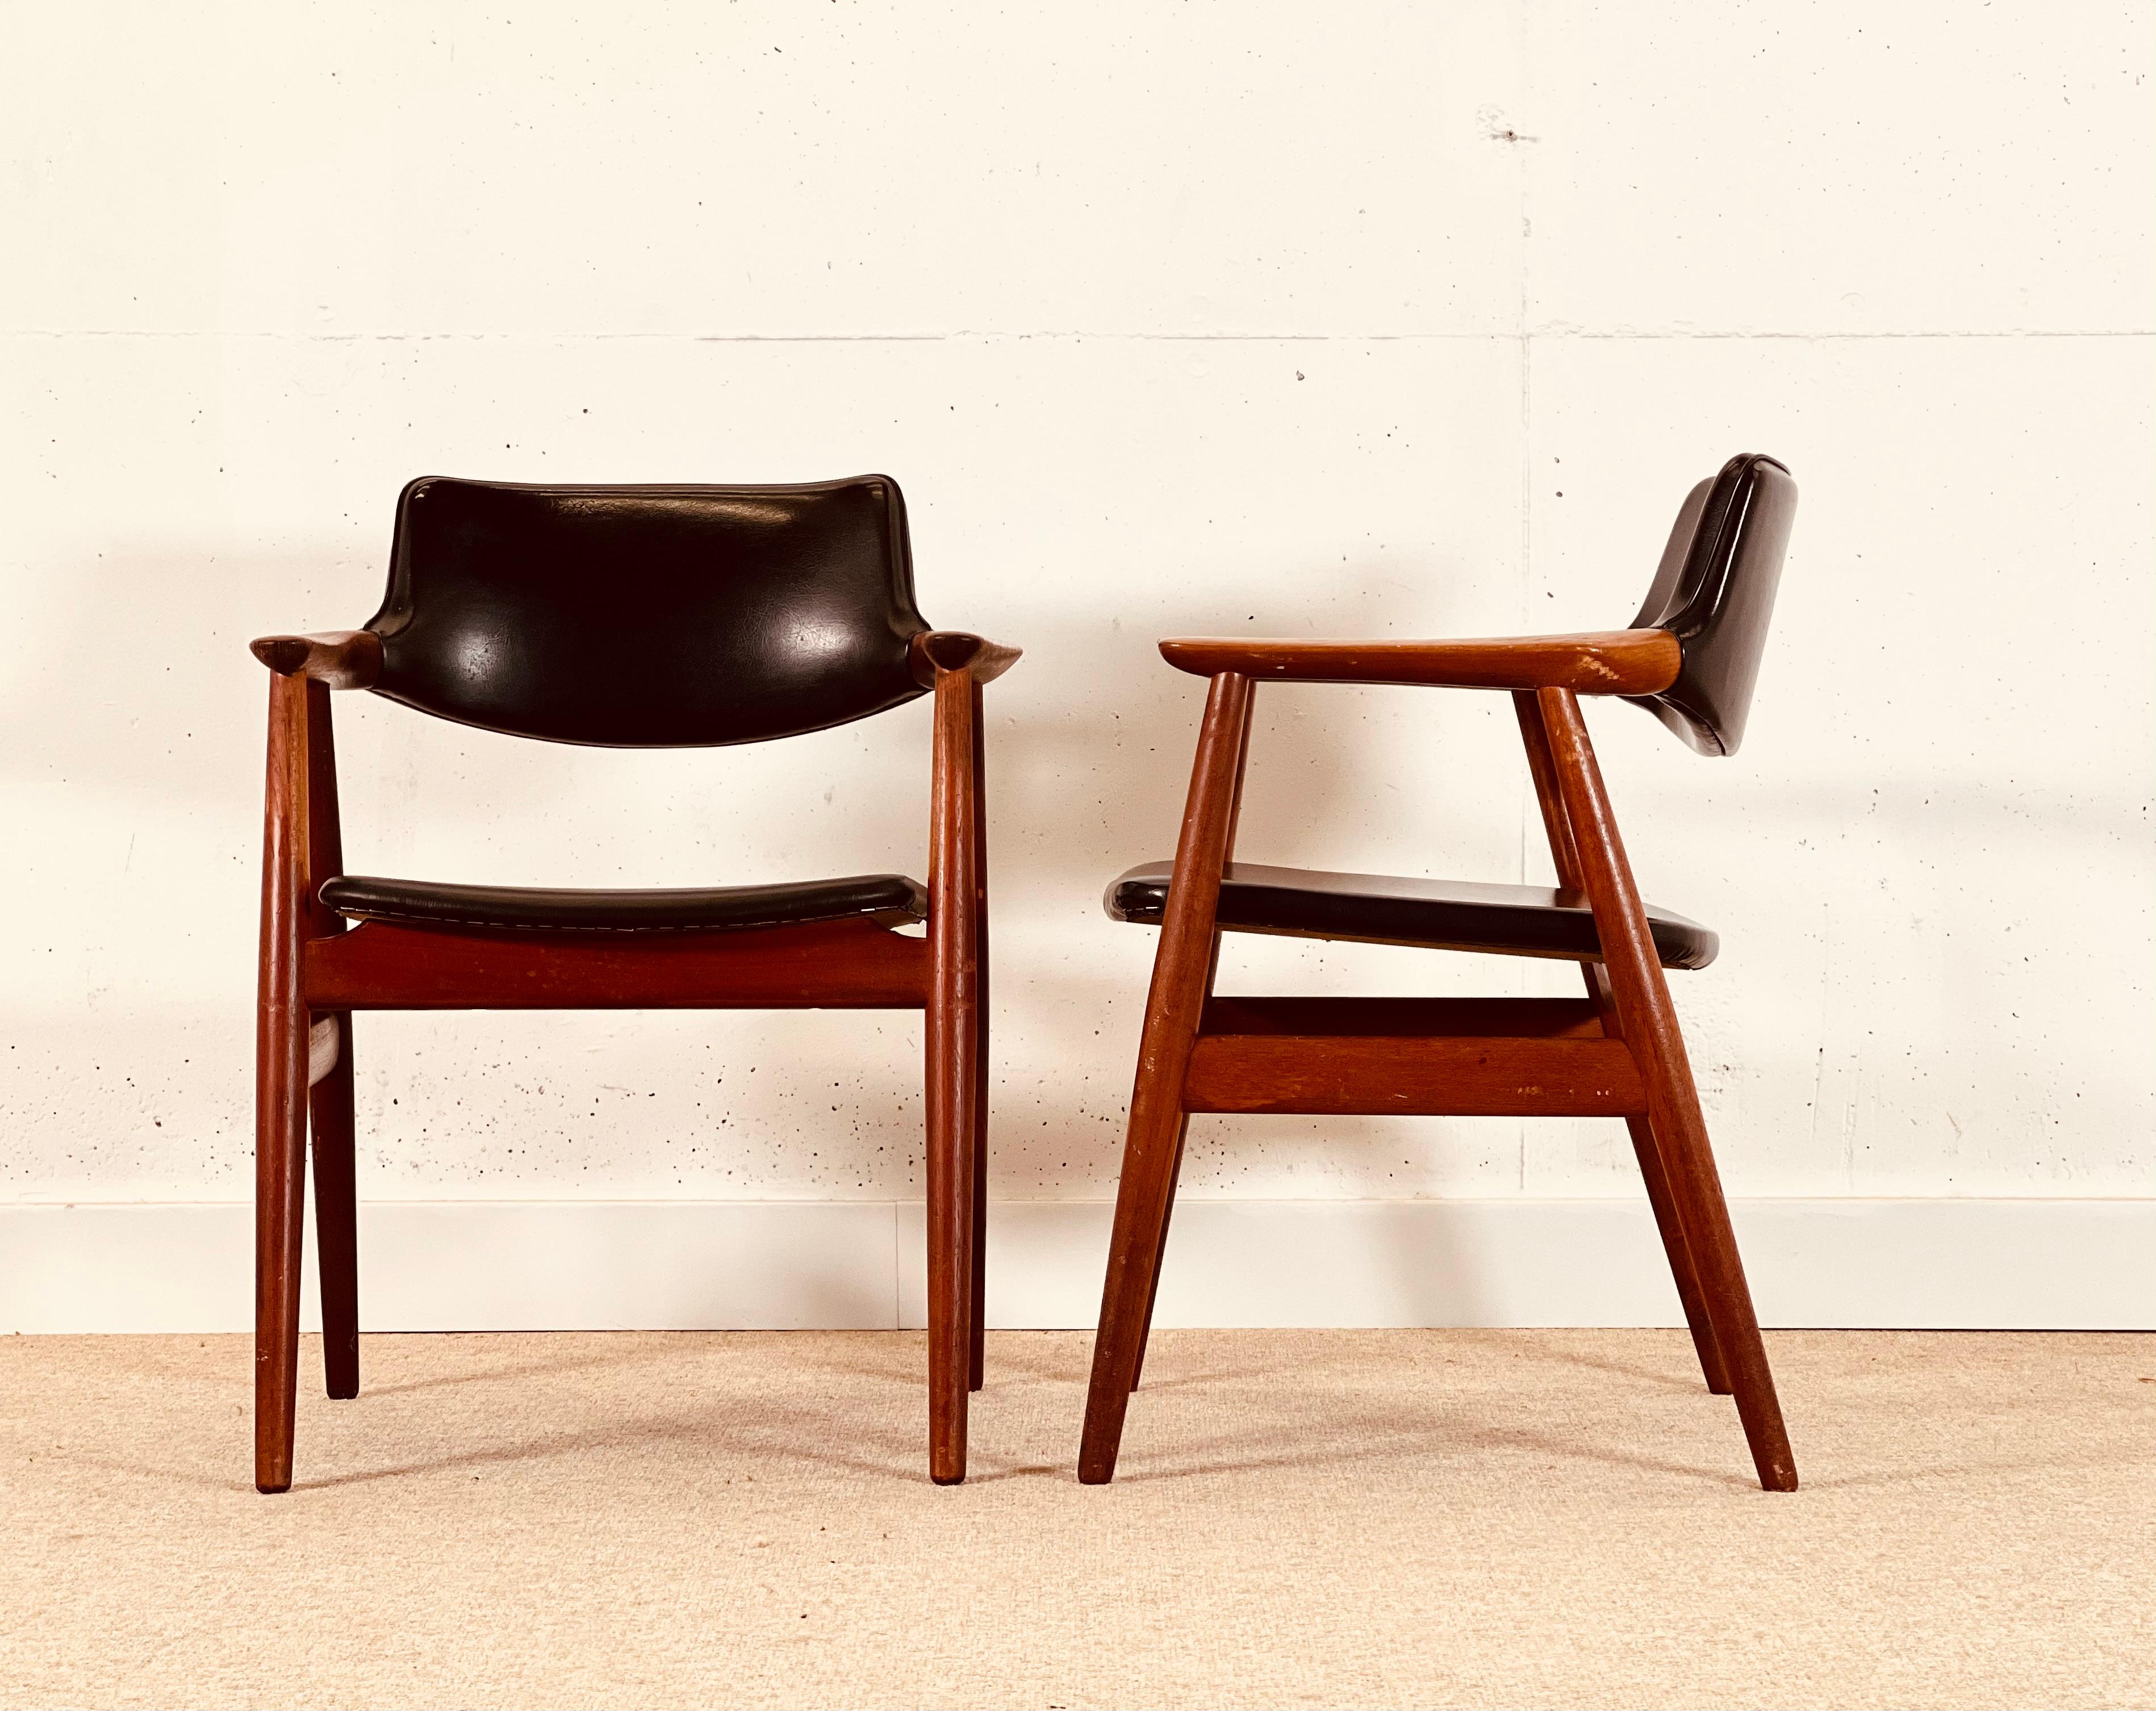 vend Age Eriksen designed a set of four chairs in Denmark in the ’60s. It is the Dining Room Chair Model Gm11.
The chairs are solid teakwood chairs with a beautiful design that keeps the armrest suspended in the air. The chairs were made with a